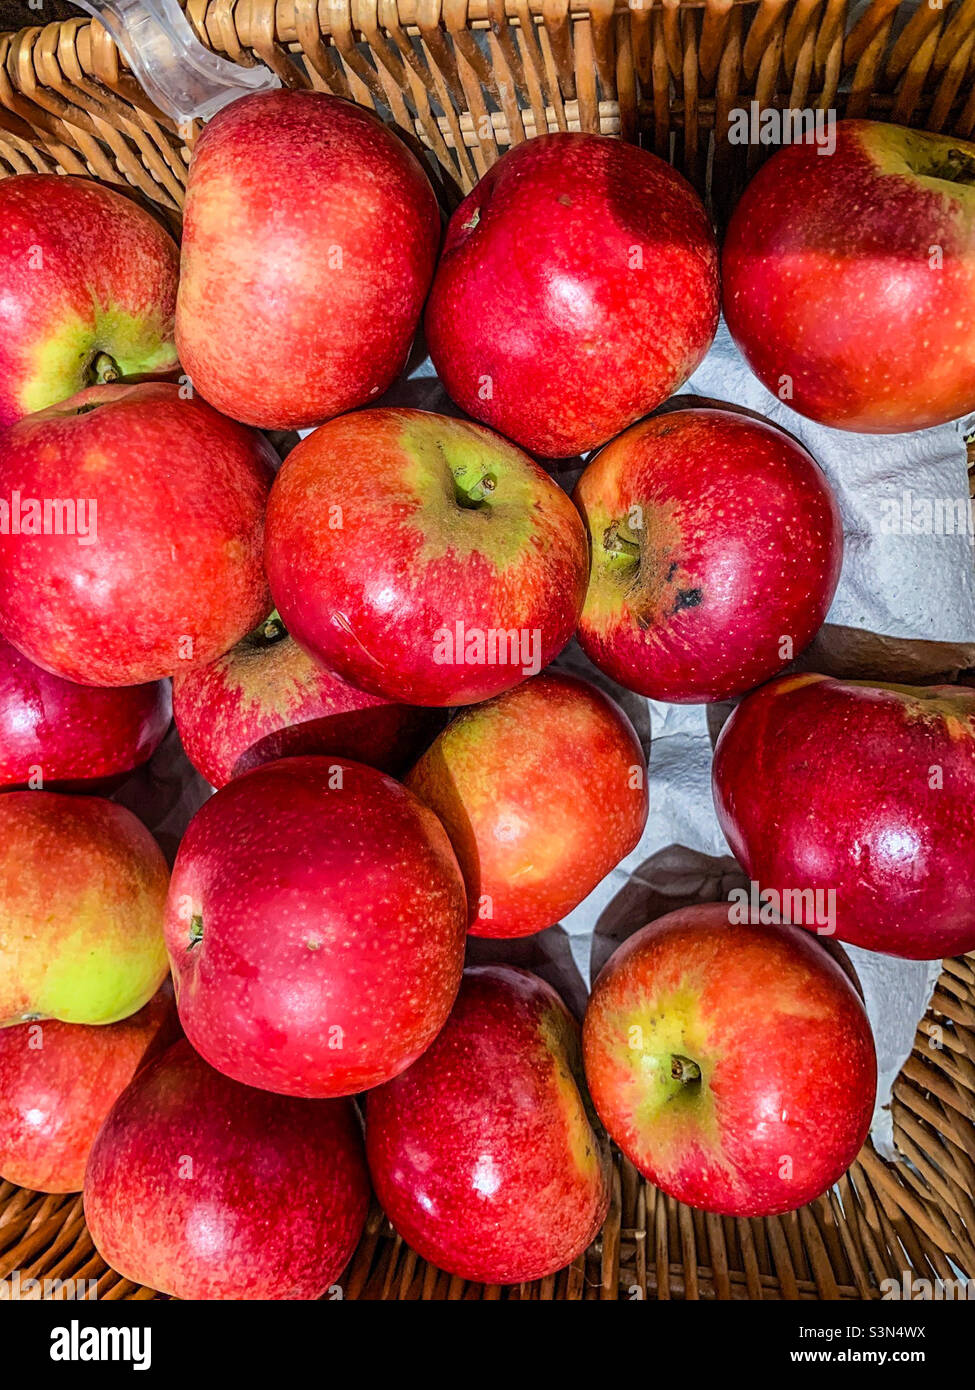 Basket of red Granny Smith apples Stock Photo